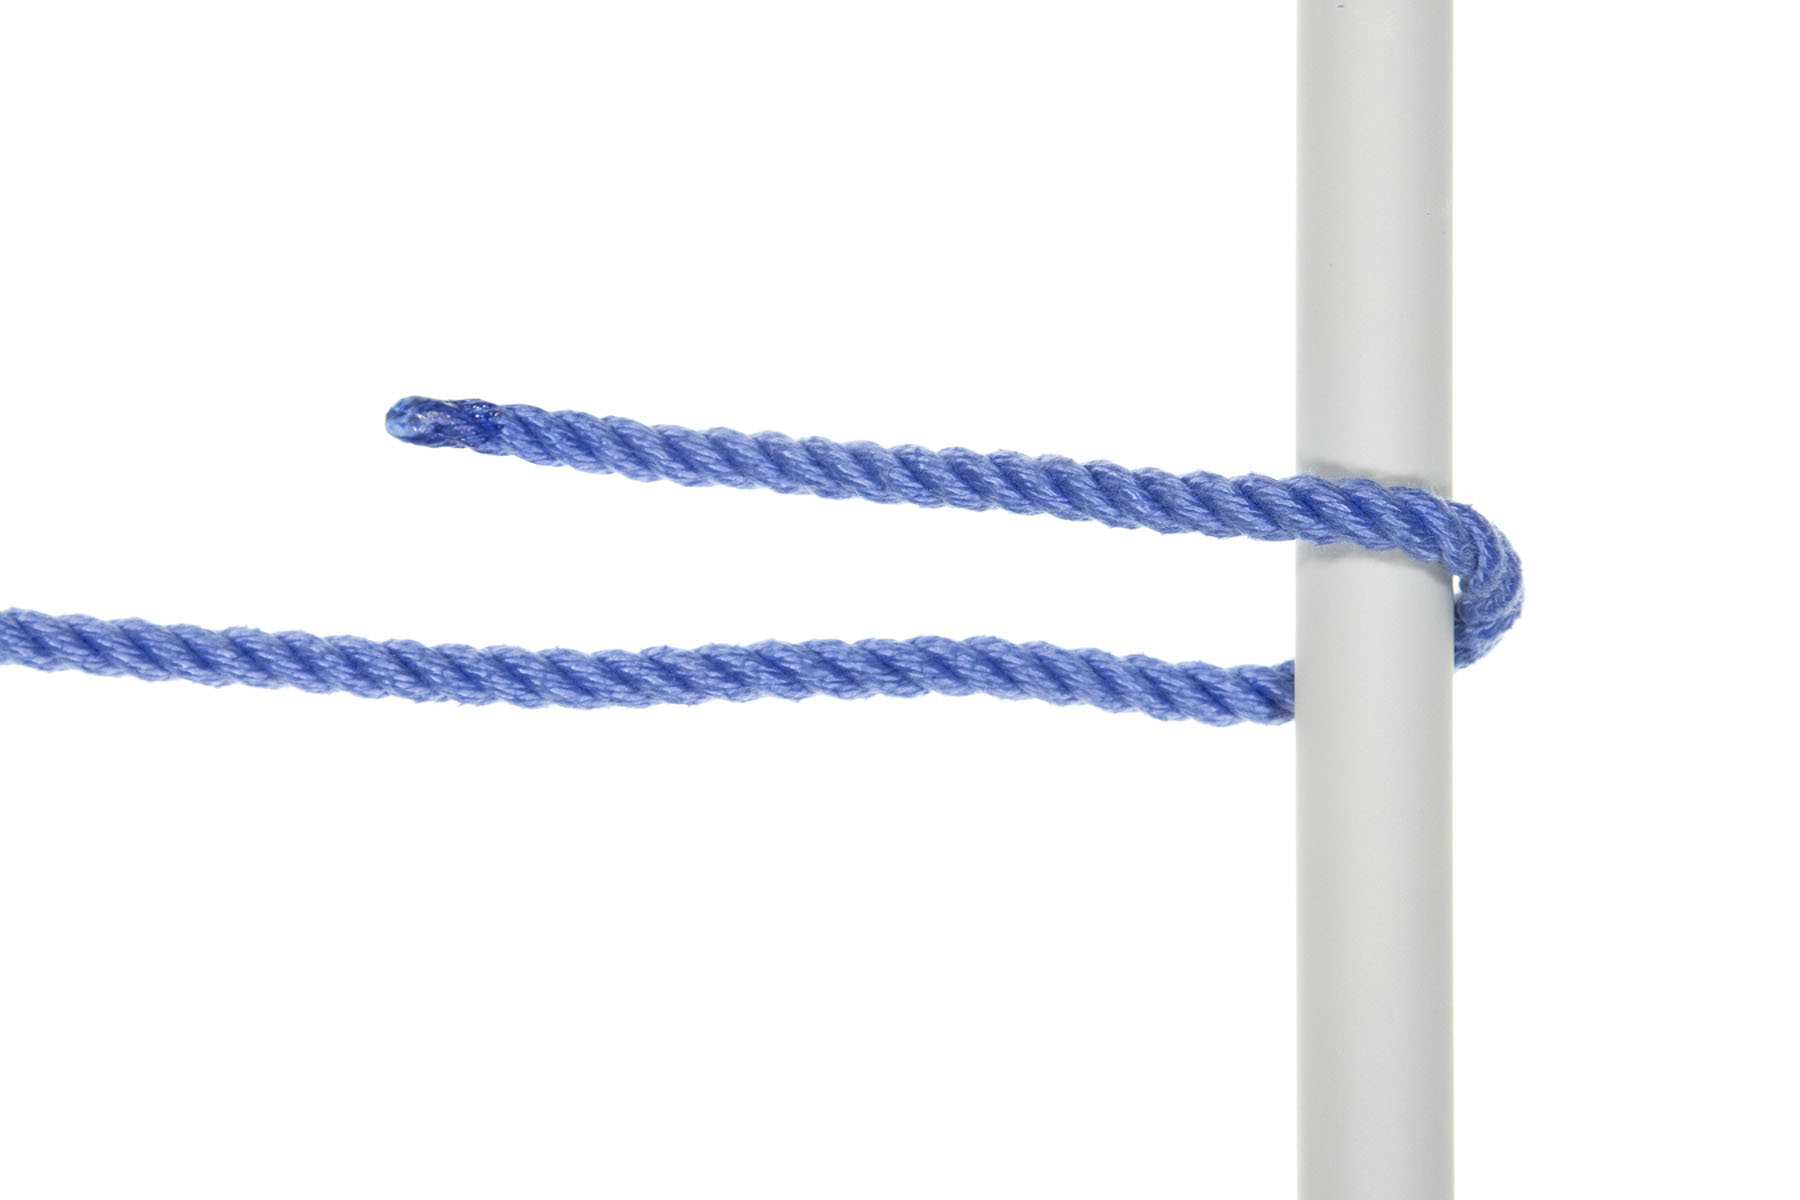 A one inch vertical gray pole divides the image. A single strand of blue rope enters from the left and makes a 180 degree turn around the pole, going under it and then doubling back on top of the pole. The working end is slightly higher in the frame than the standing part.